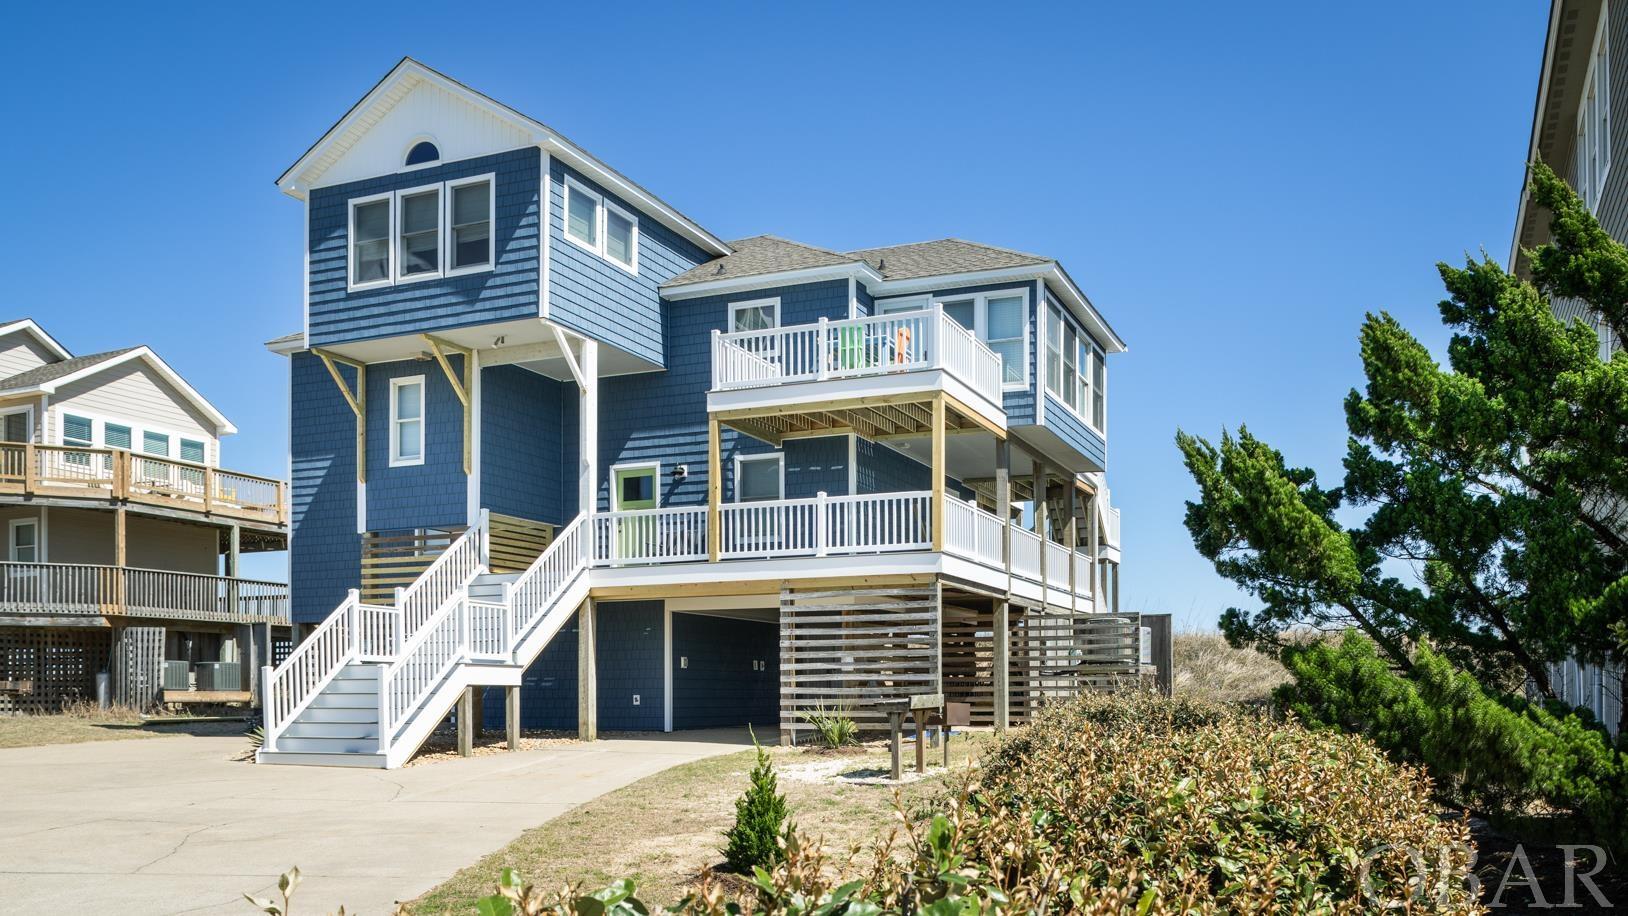 Looking for a great home on an amazing oceanfront lot, this is it.  Located in Carolina Dunes, this 75ft wide x approximately 300 foot deep oceanfront lot has beautiful views of the ocean and the beach.  Located in one of the most sought after areas of the OBX, the lots are large and the elevation is high.  There aren't many oceanfront homes where you can actually see folks enjoying the beach from the house.  Six bedrooms and all on on the 2nd or 3rd floor.  All rooms enjoy plenty of natural light and 4 with direct access to the covered or sun deck, hot tub and magnificent views of the ocean.  The owners have constantly updated this home.  Within the past 5 years, the siding has been replaced with vinyl shakes rated at 200mph, all new trek decking with vinyl white vinyl railings.  Inside, they have added white shiplap ceilings to many of the rooms, upgraded the flooring with LVP and remolded all 4 baths with flooring, 3 tile showers, all new vanities and fixtures.  Many windows and doors have also been replaced to new higher quality glass.  Enjoy sitting on the polywood furniture on the sun decks or relaxing in the new hot tub on the covered deck while watching the happiness on the beach.  You can move right in as this one has been lovingly cared for and maintained.  You don't want to miss this one.  If location is everything for you, you should see this one today!